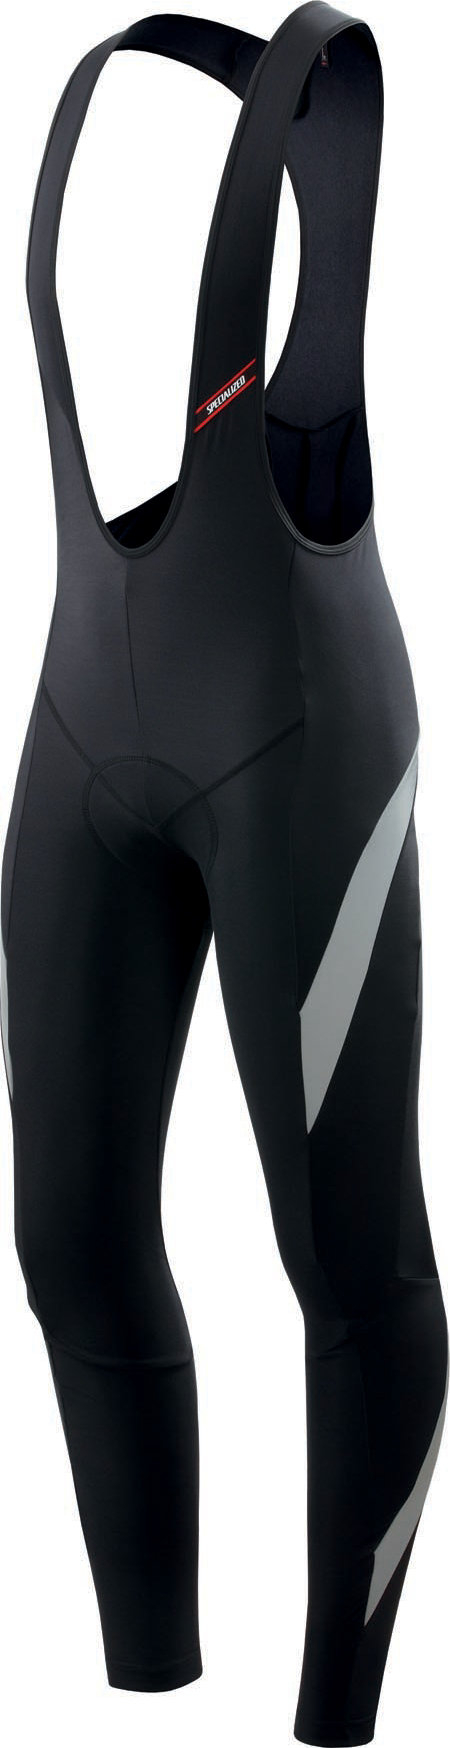 Specialized Therminal RBX Comp HV Cycling Bib Tight